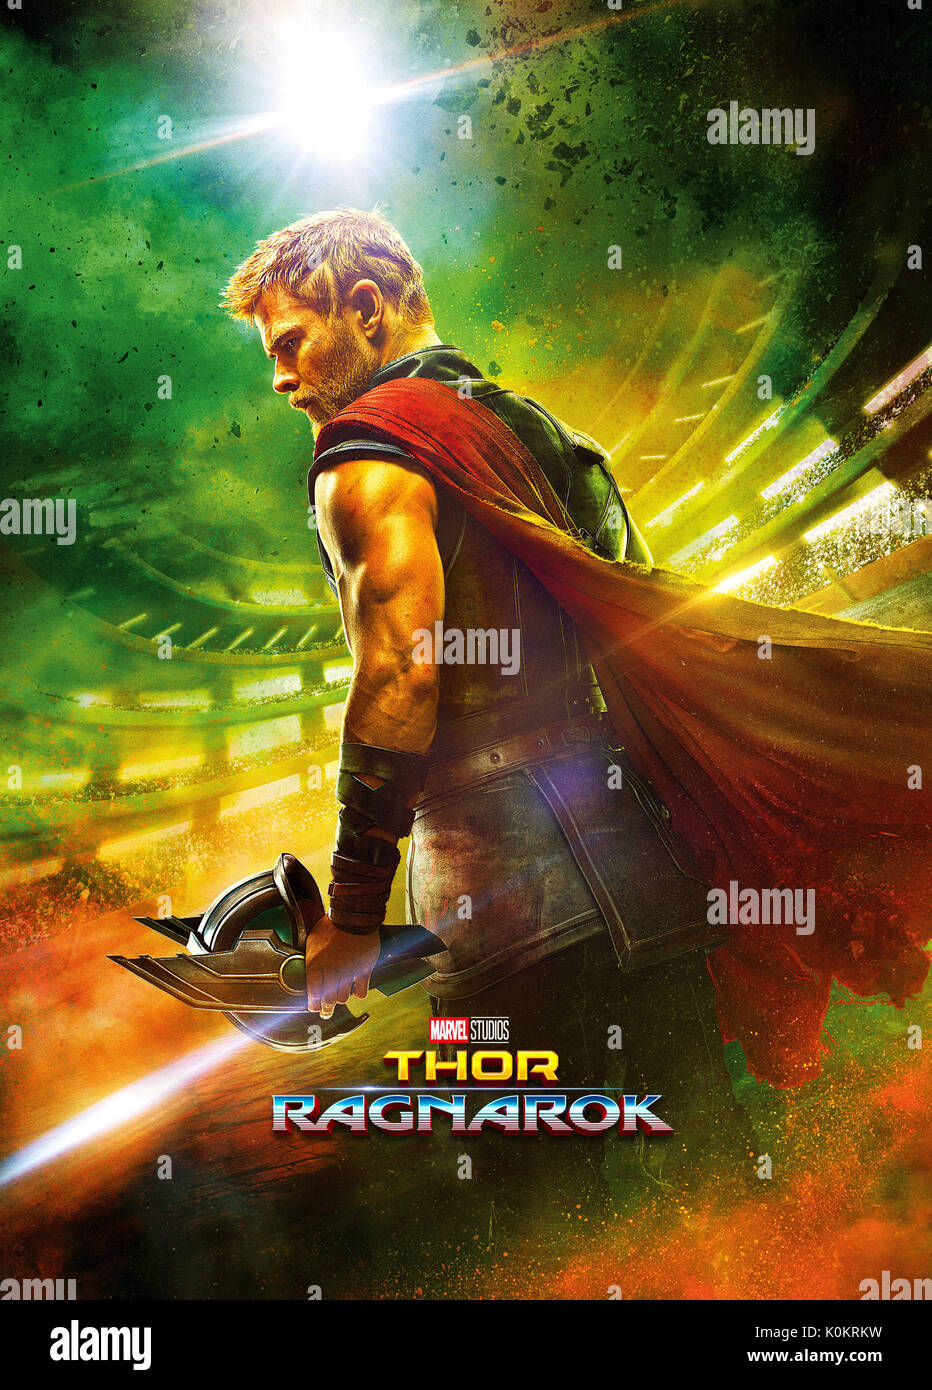 RELEASE DATE: November 3, 2017 TITLE: Thor: Ragnarok STUDIO: Marvel DIRECTOR: Taika Waititi PLOT: Thor must face the Hulk in a gladiator match and save his people from the ruthless Hela STARRING: CHRIS HEMSWORTH as Thor Poster art. (Credit: Marvel/Entertainment Pictures/ZUMAPRESS.com Stock Photo